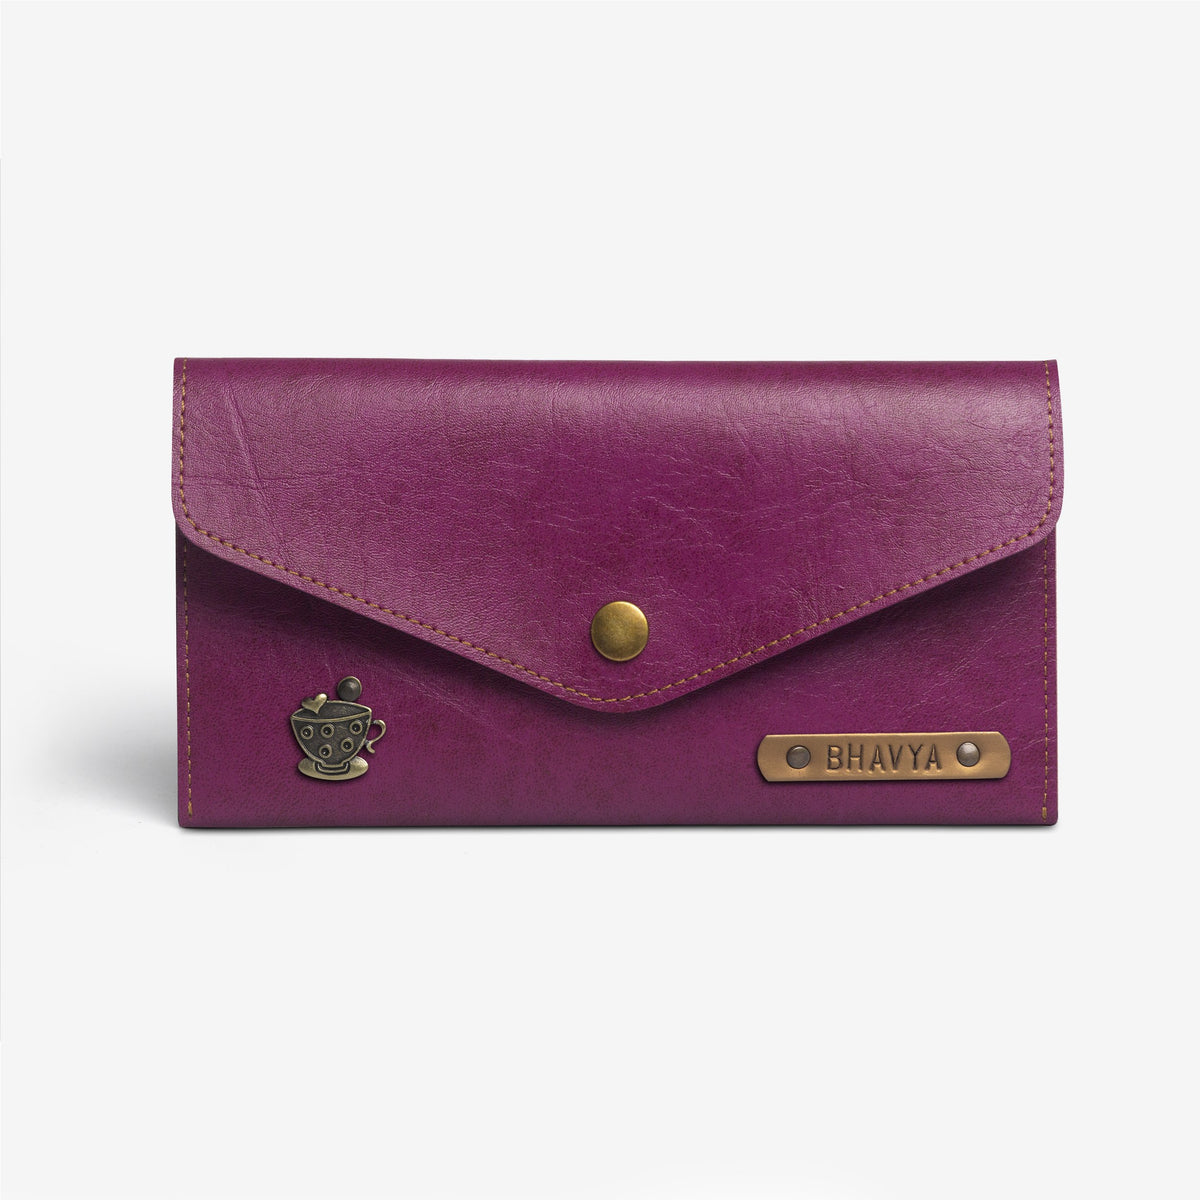 Personalized Women's Wallet - Wine by The Messy Corner